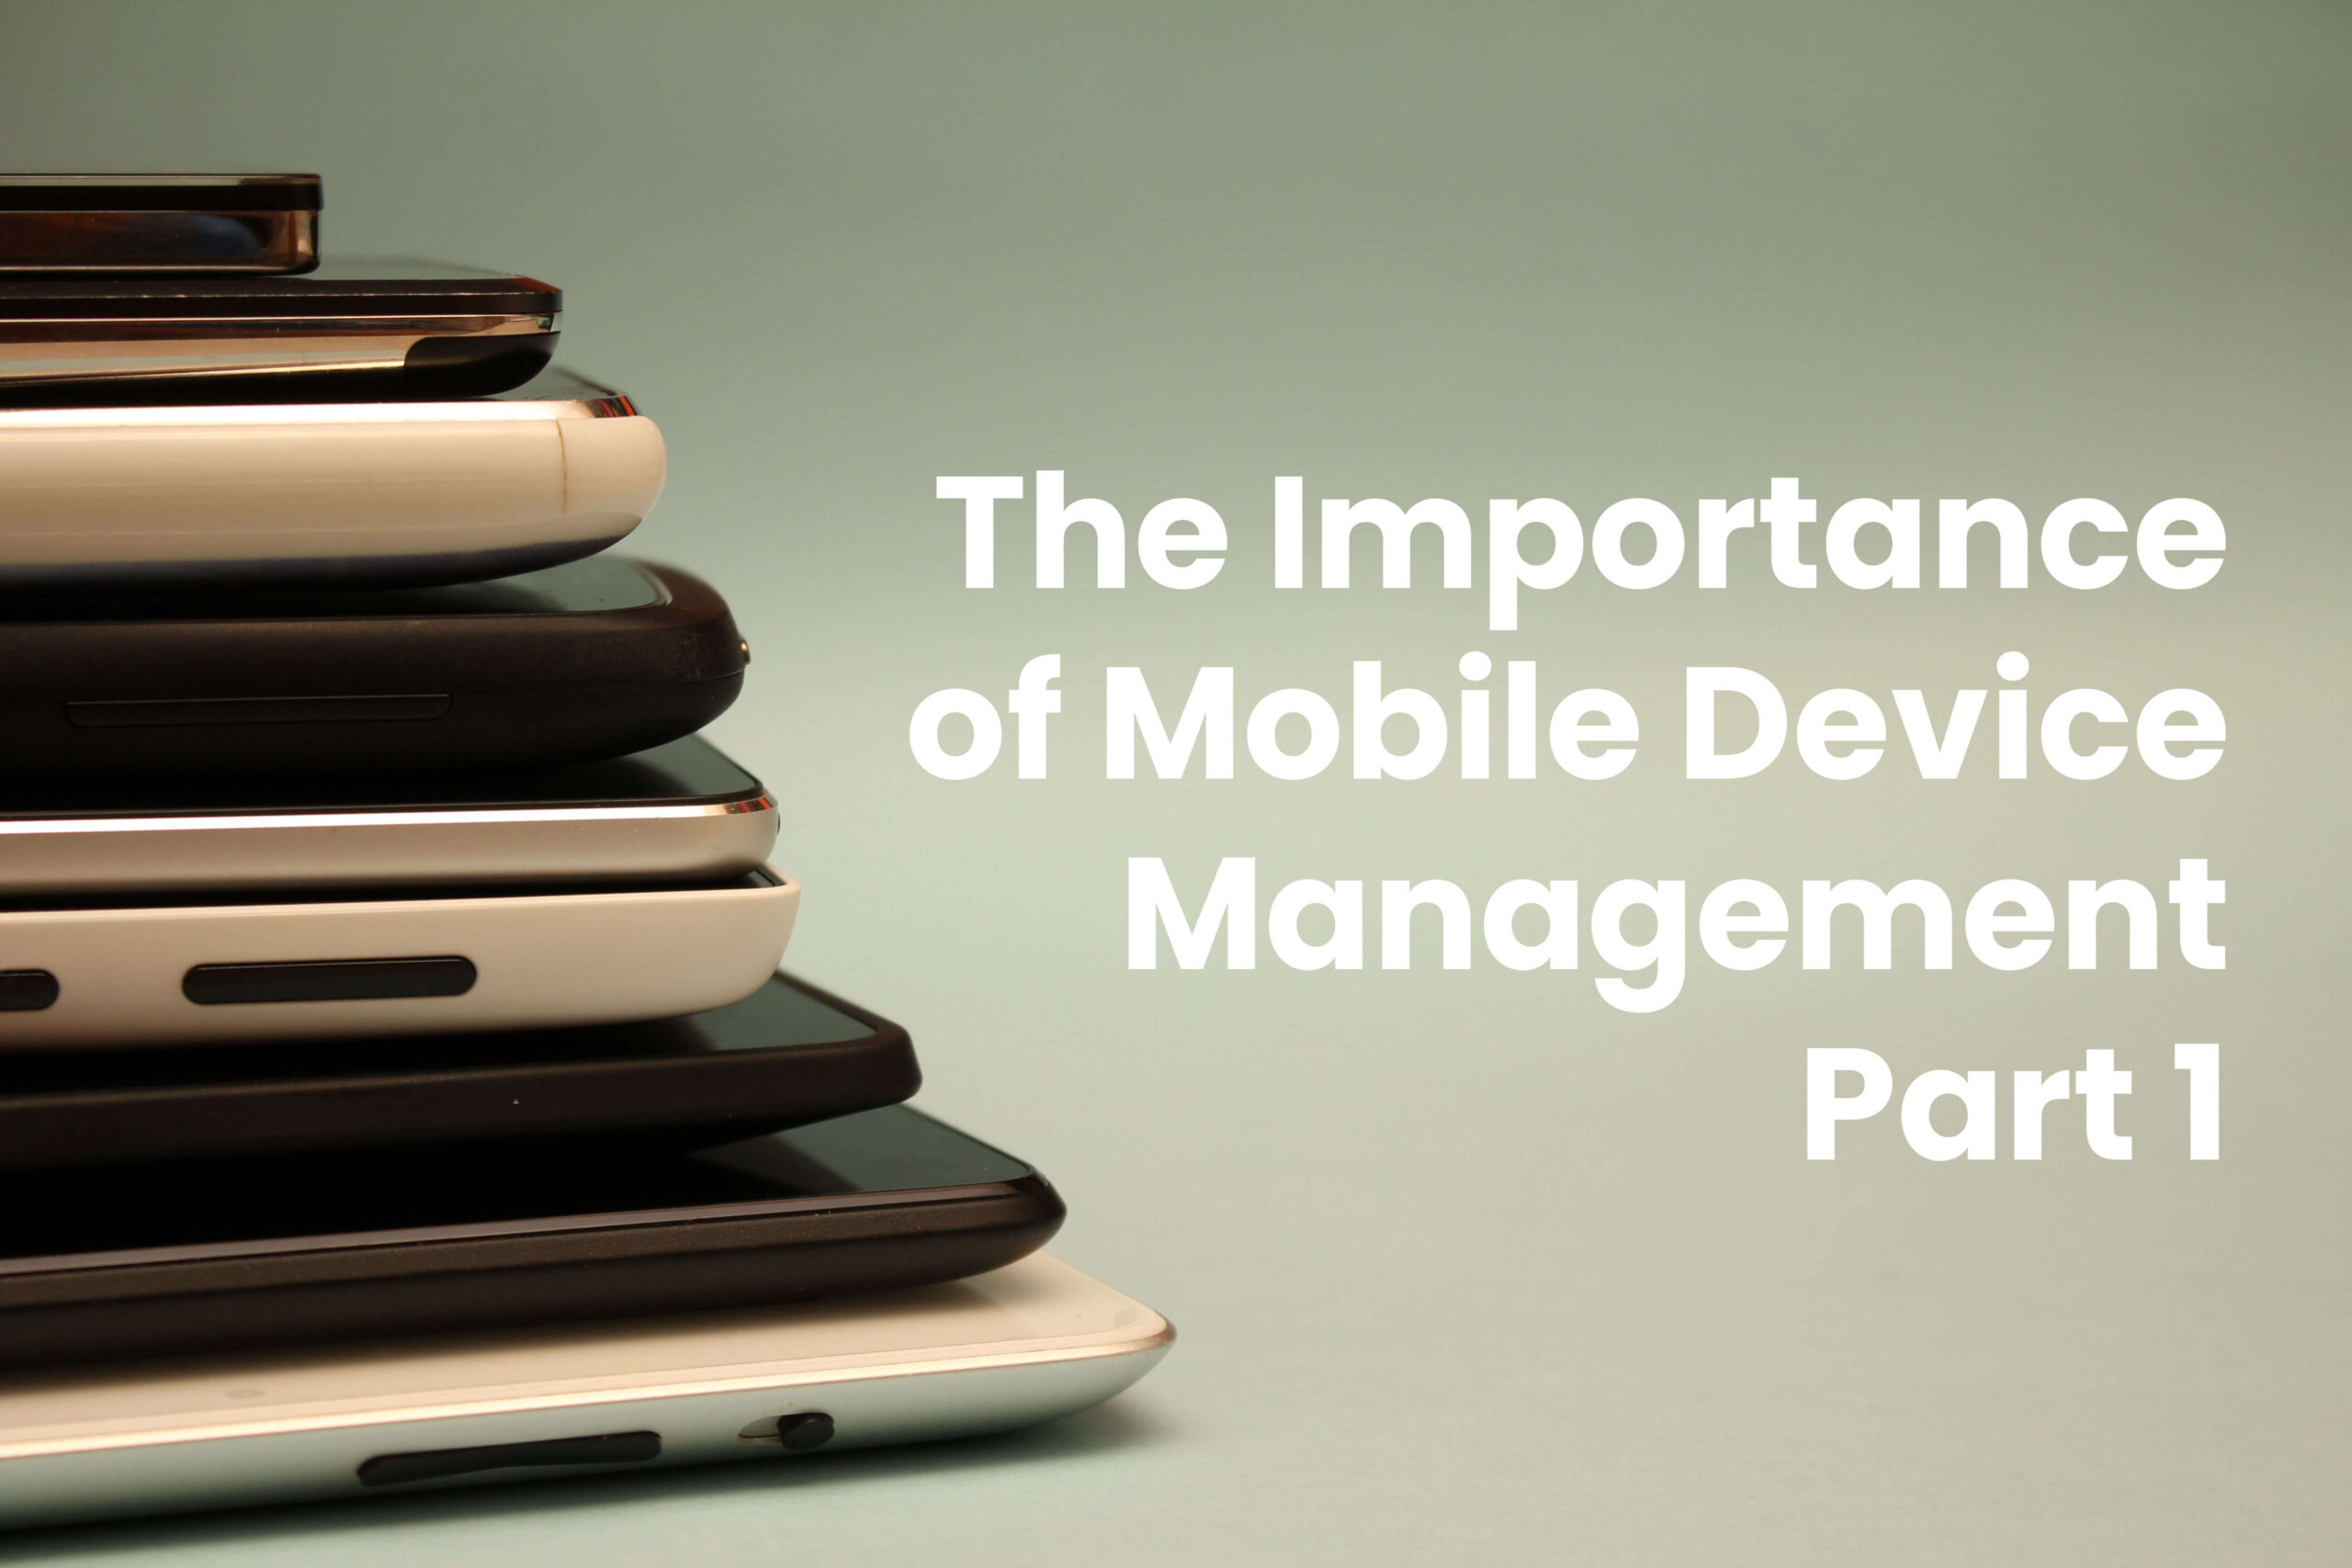 The Importance of Mobile Device Management Part 1